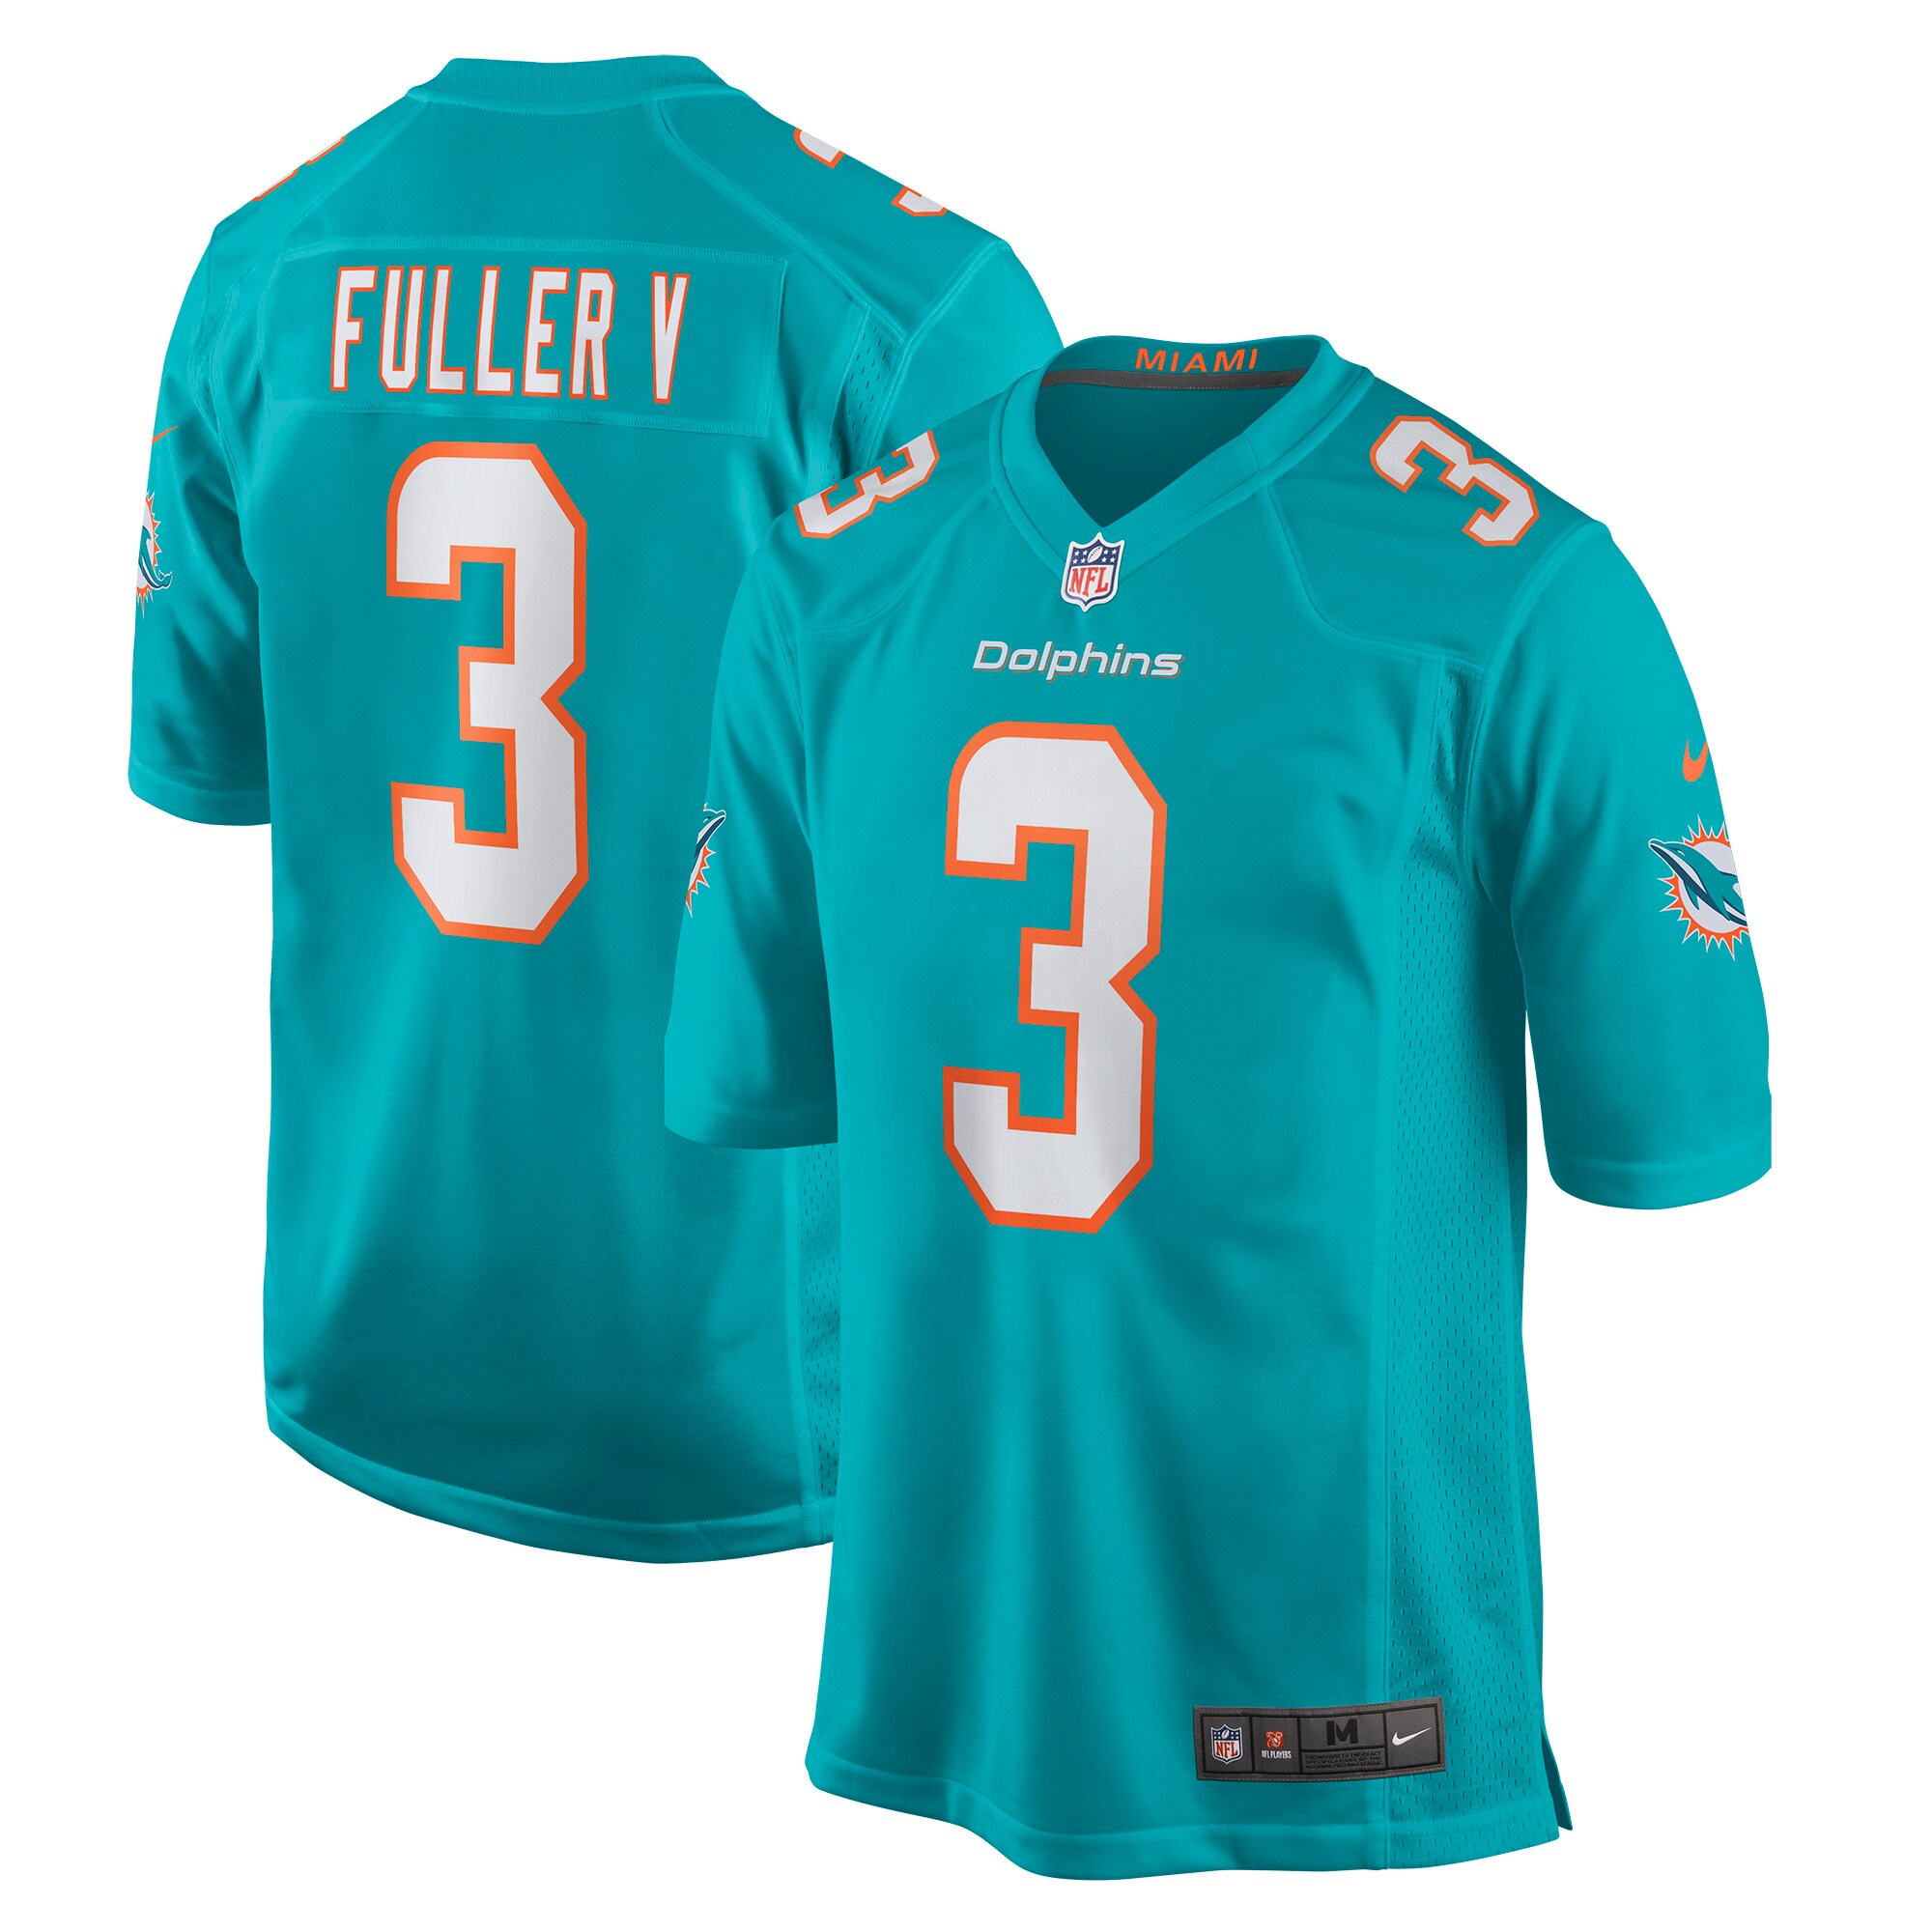 Men's Miami Dolphins Jerseys Aqua Will Fuller V Game Player Style